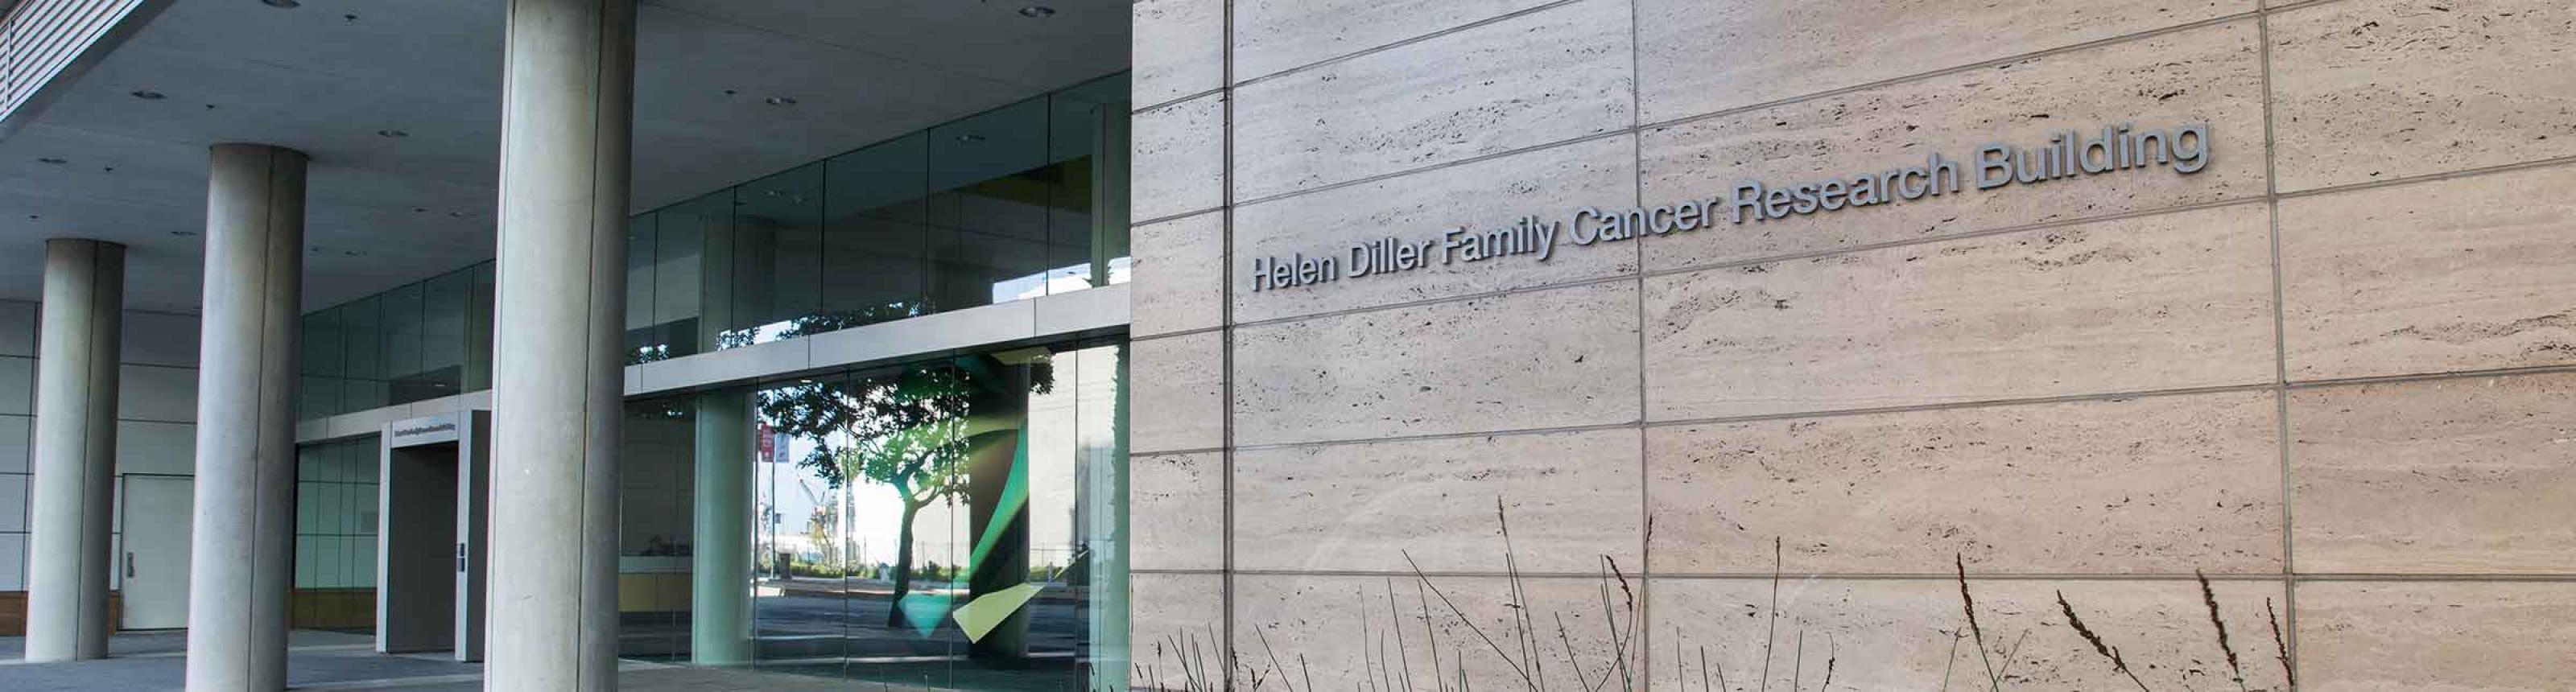 Helen Diller Family Cancer Research building